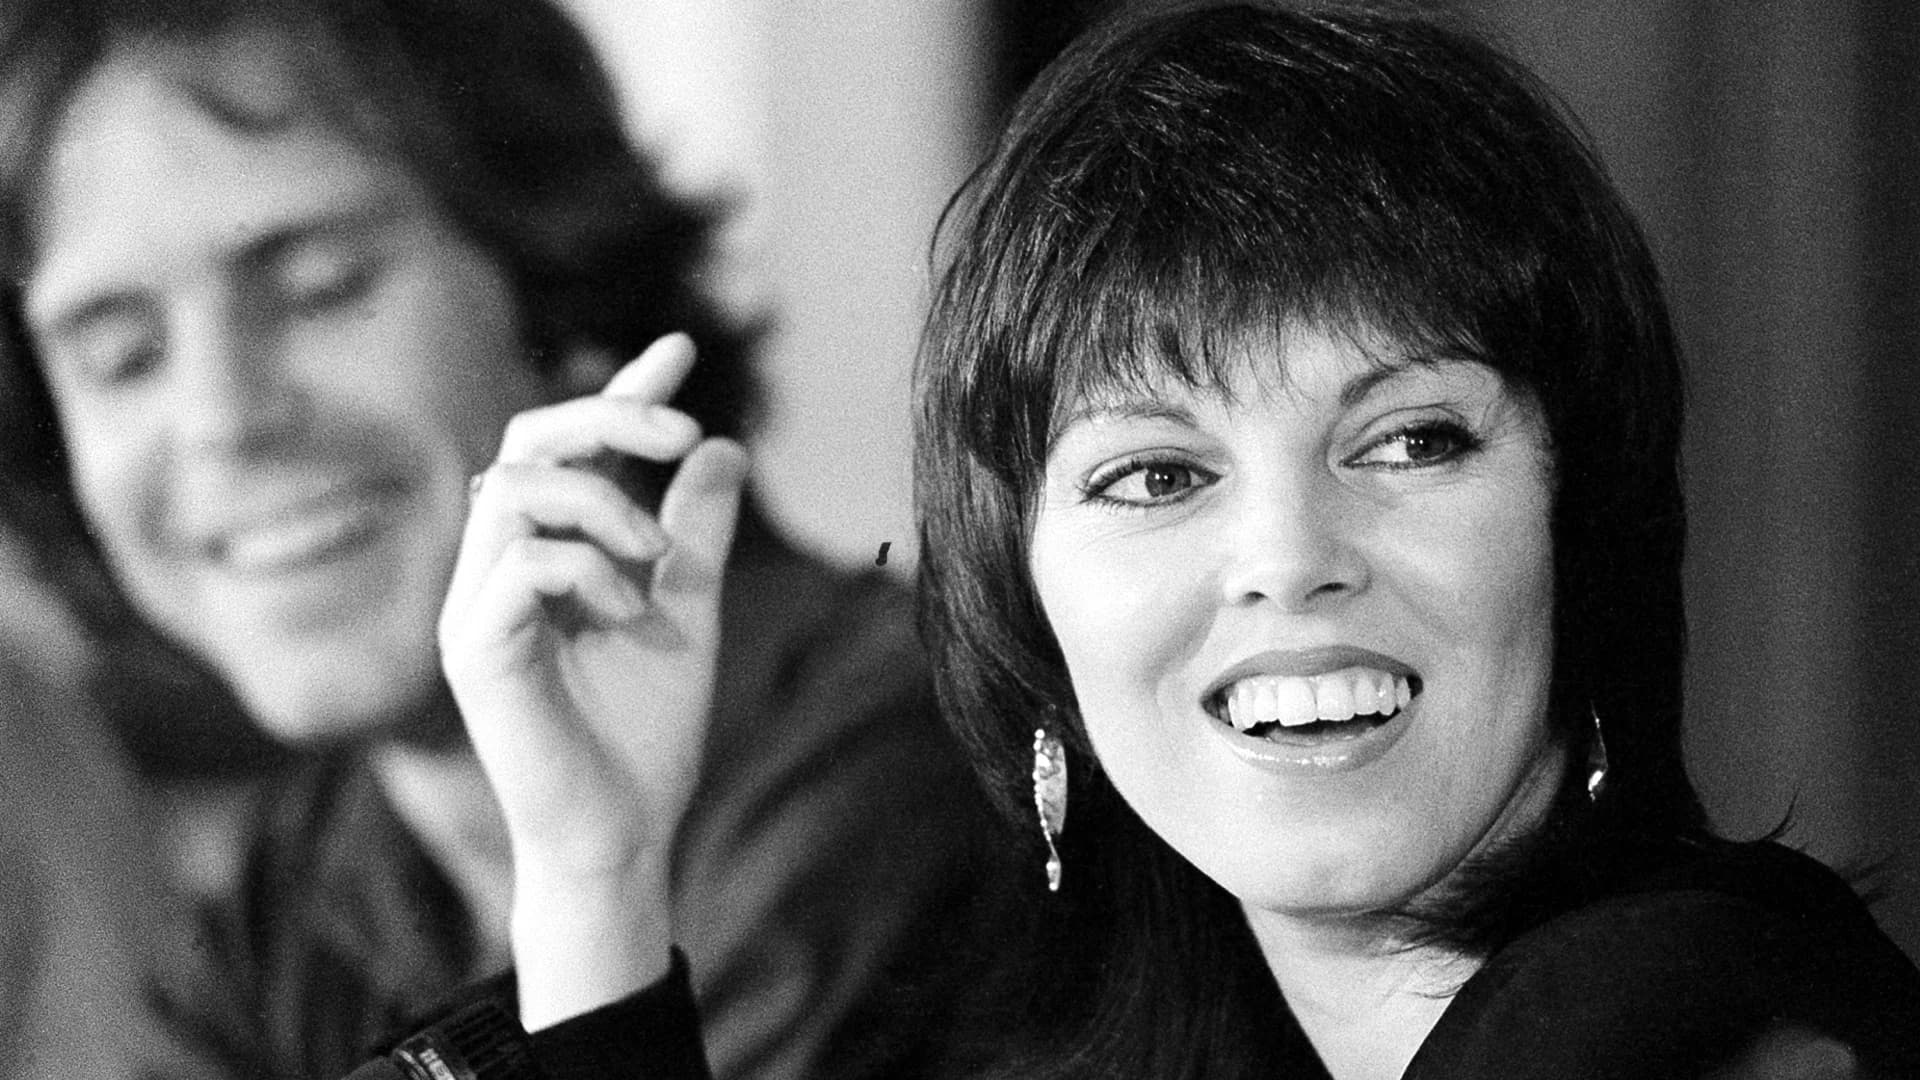 Long Island's Pat Benatar to be inducted into Rock and Roll Hall of Fame